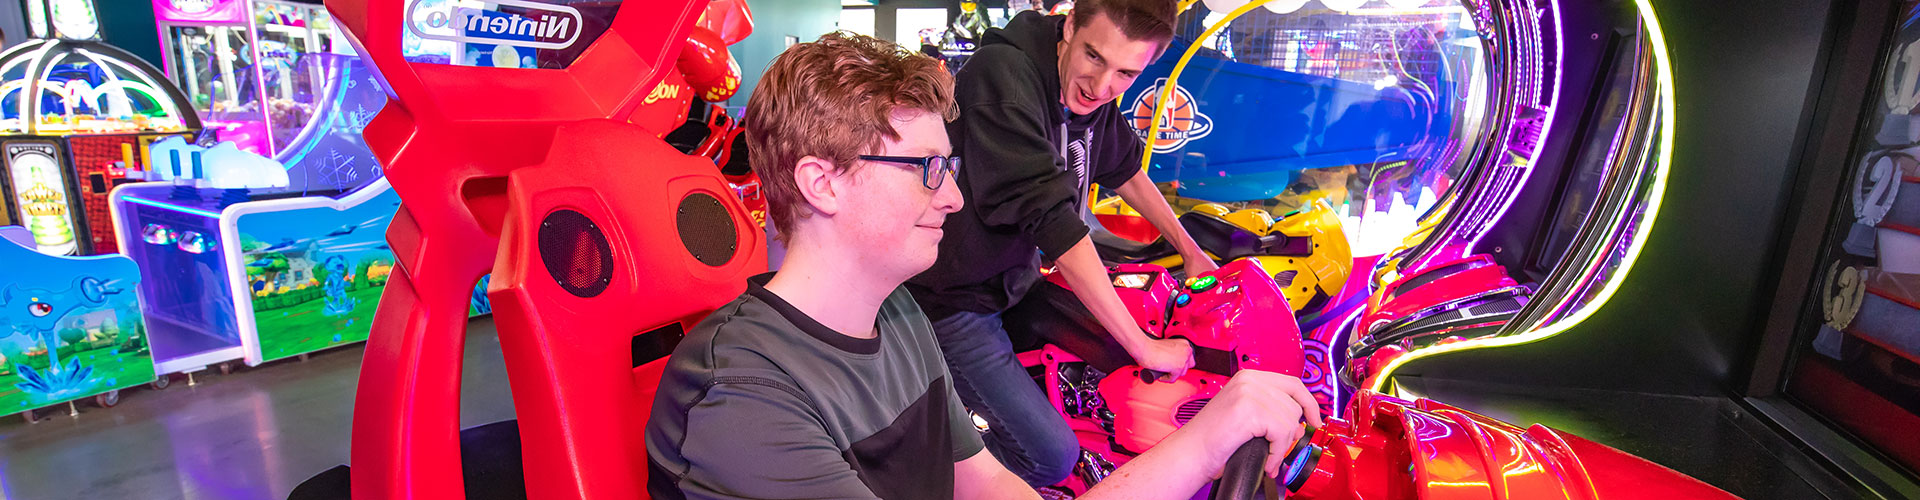 Two youths playing arcade games